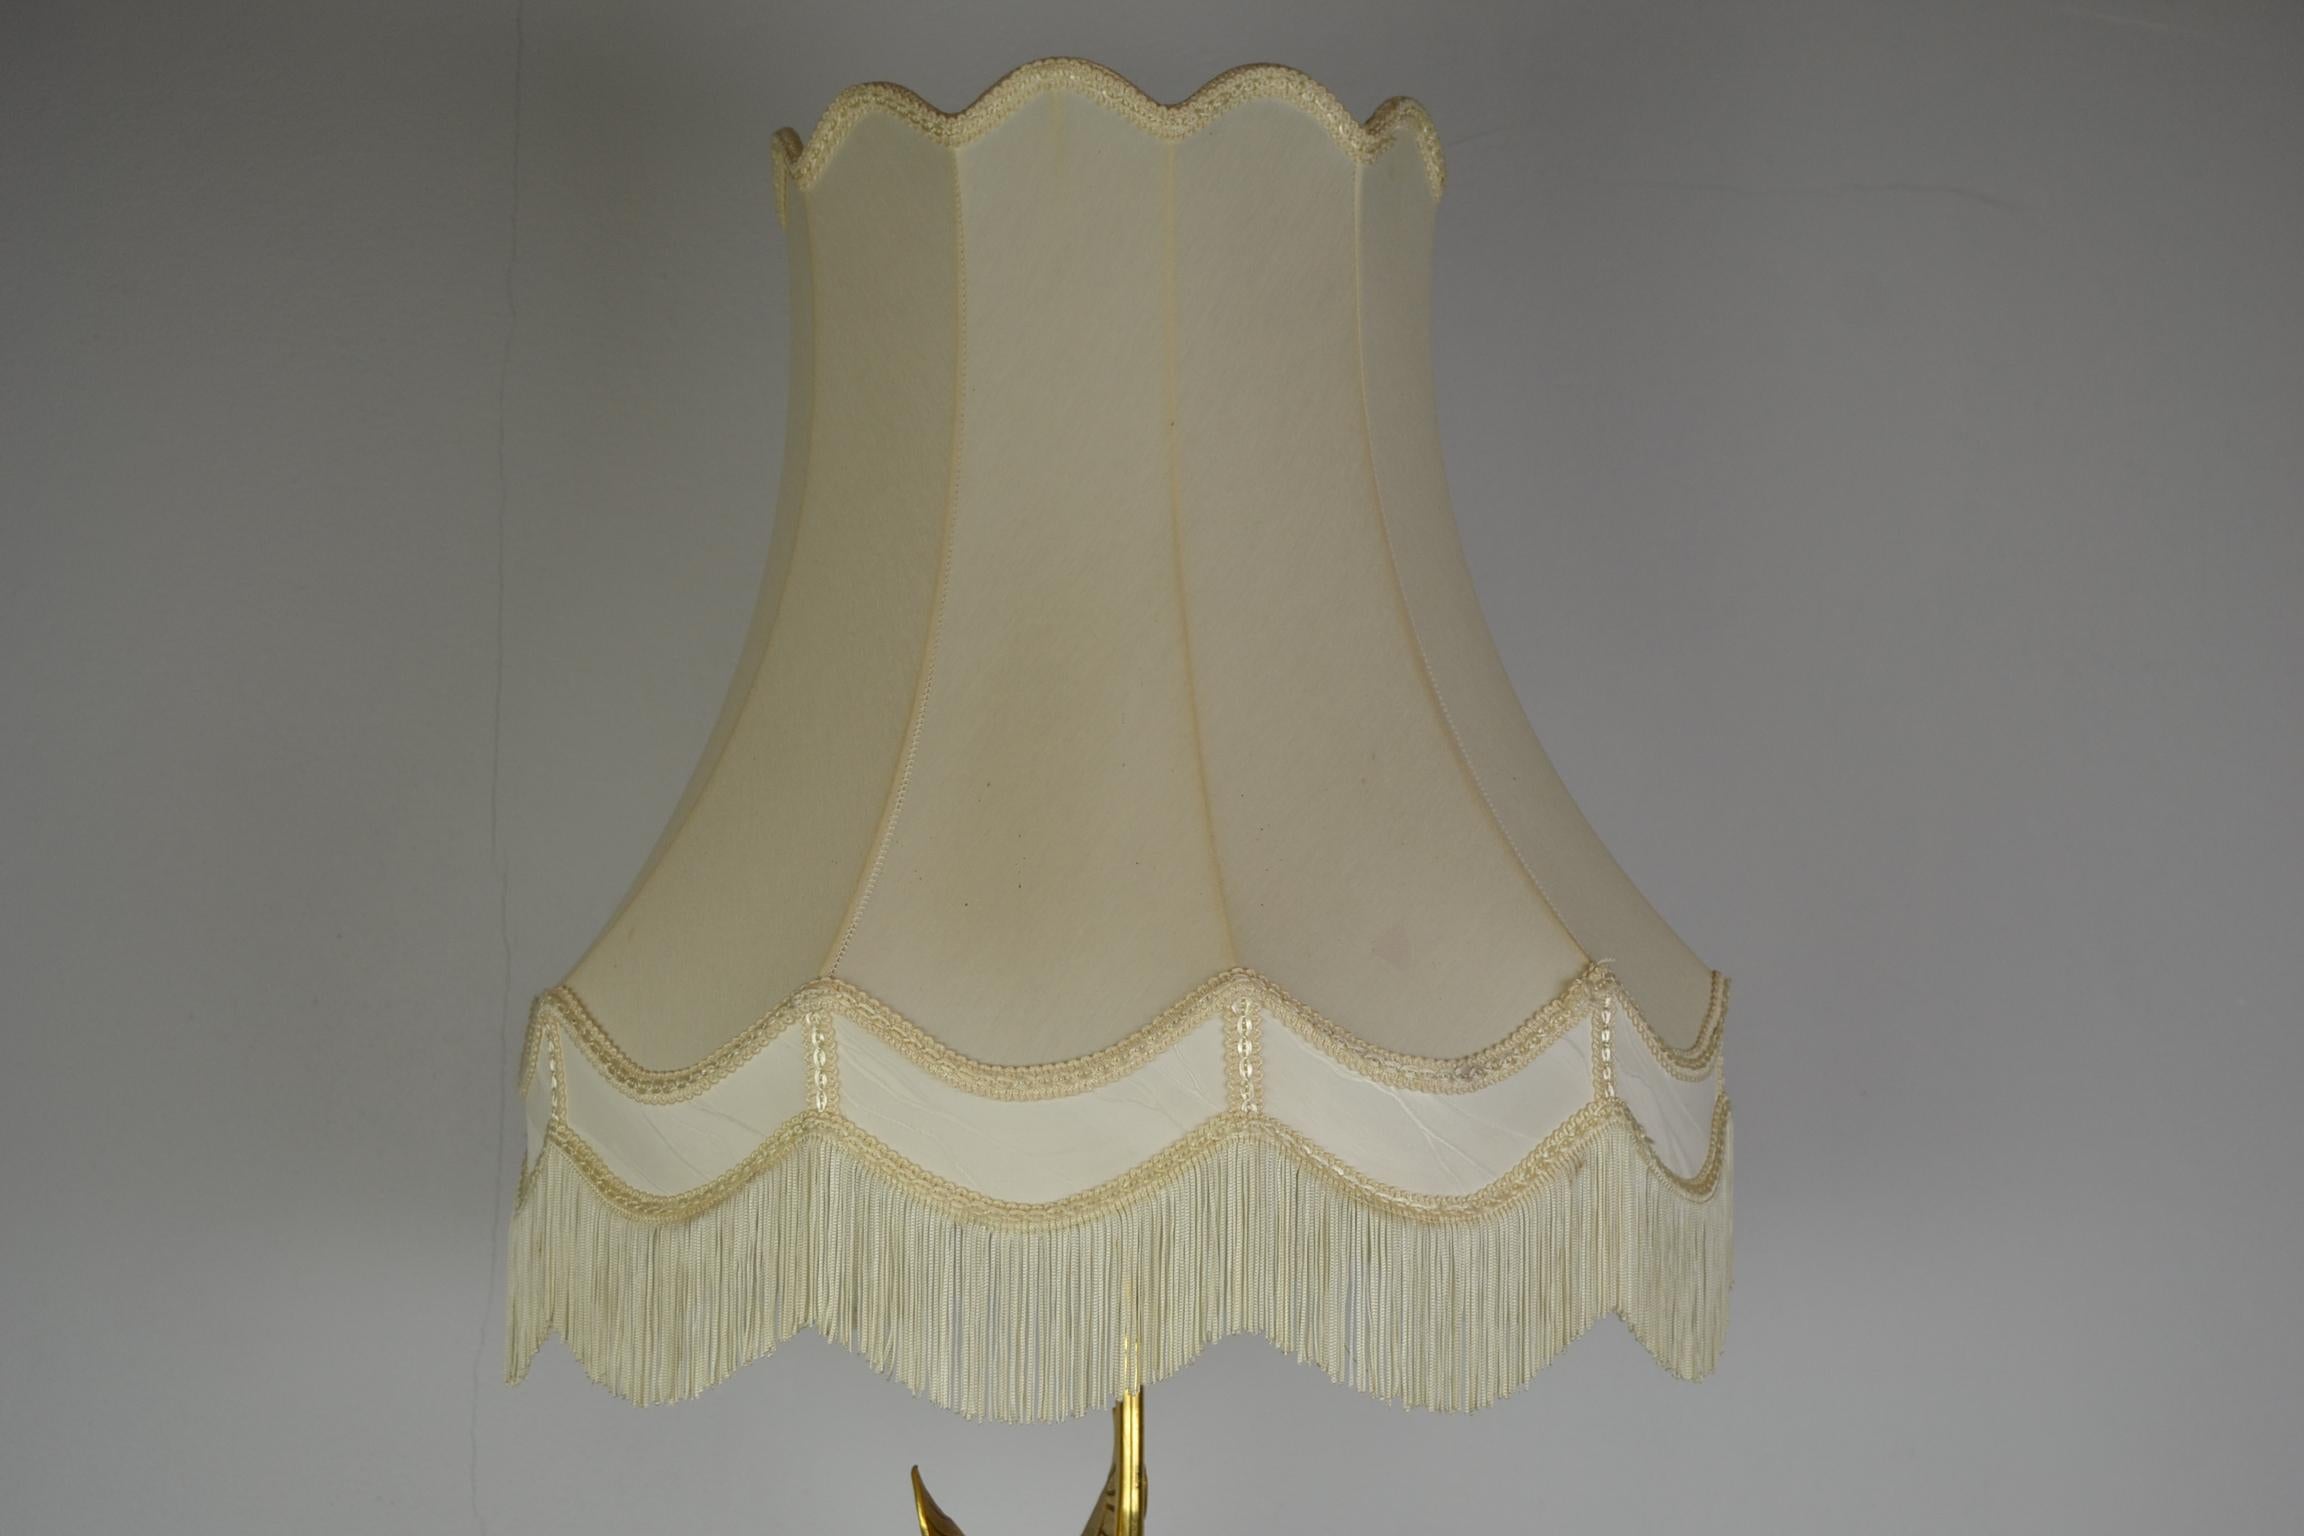 Large Lanciotto Galeotti Peacock Table Lamp for L'Originale, Italy, 1970s For Sale 8